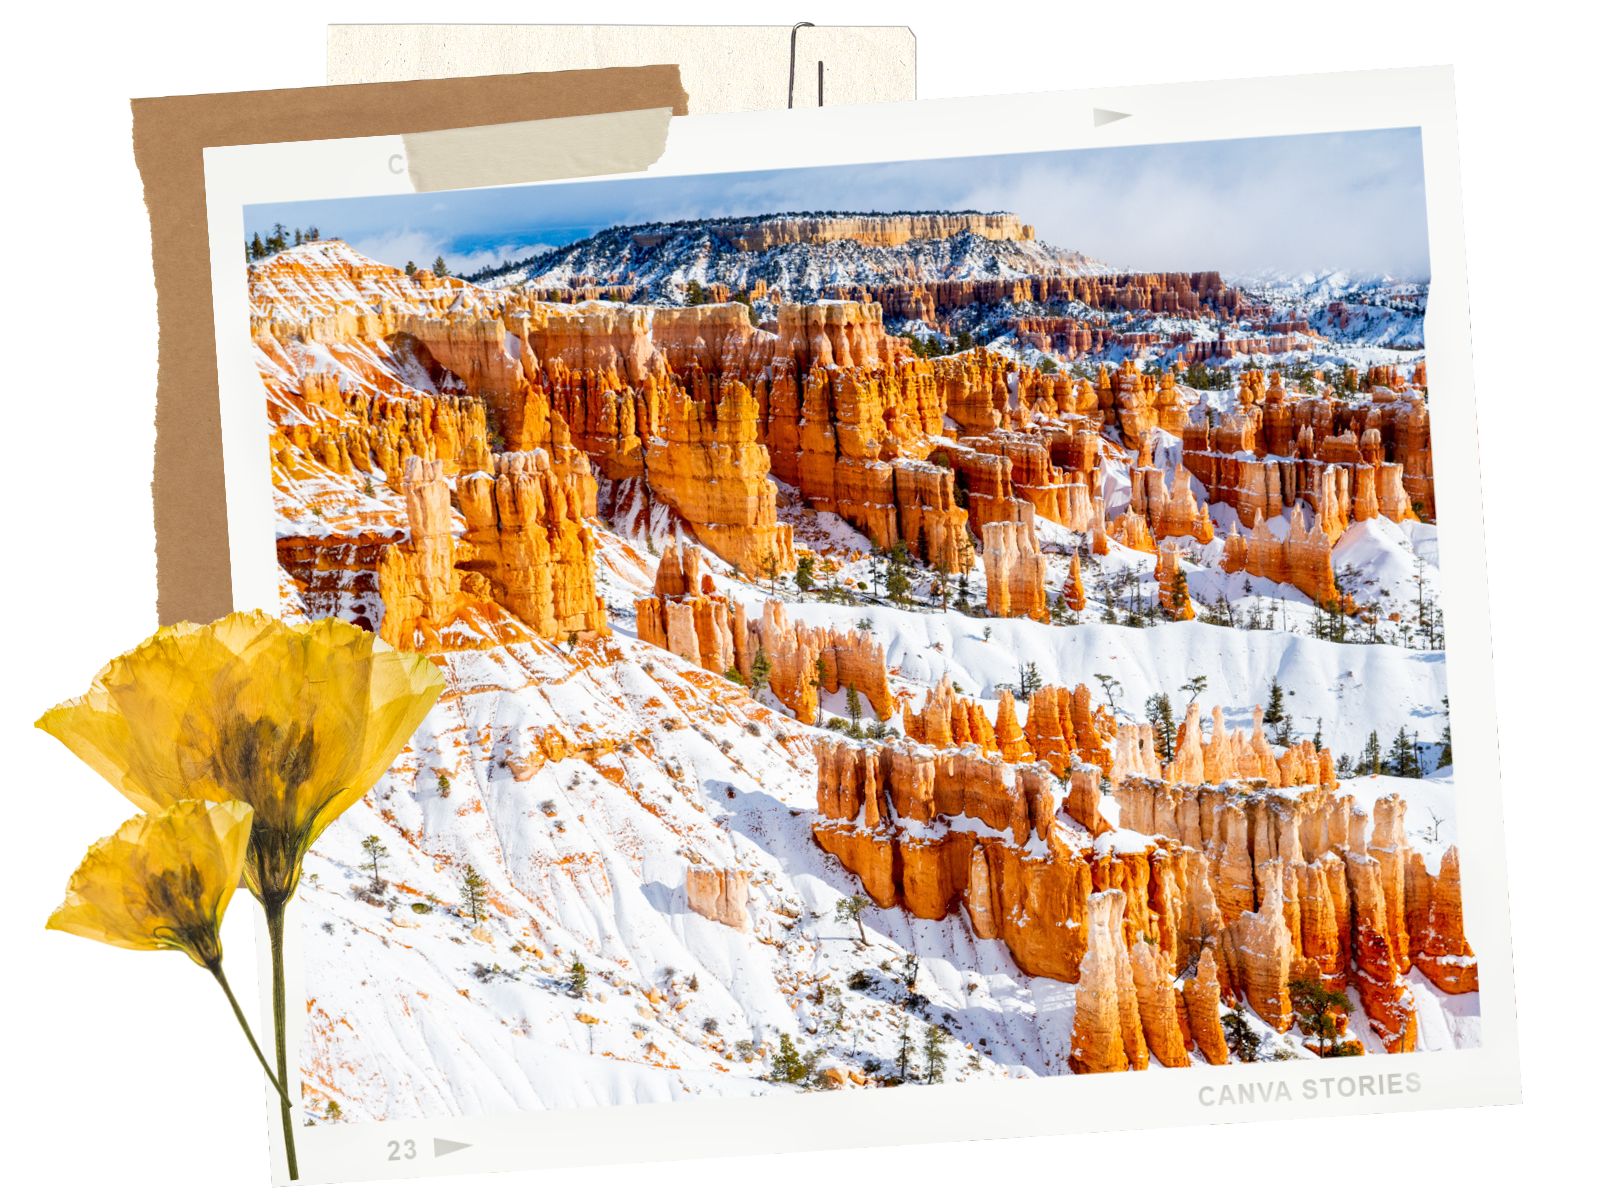 How Long should i stay - Why You Must Visit Bryce Canyon NP in the Winter: Complete Guide